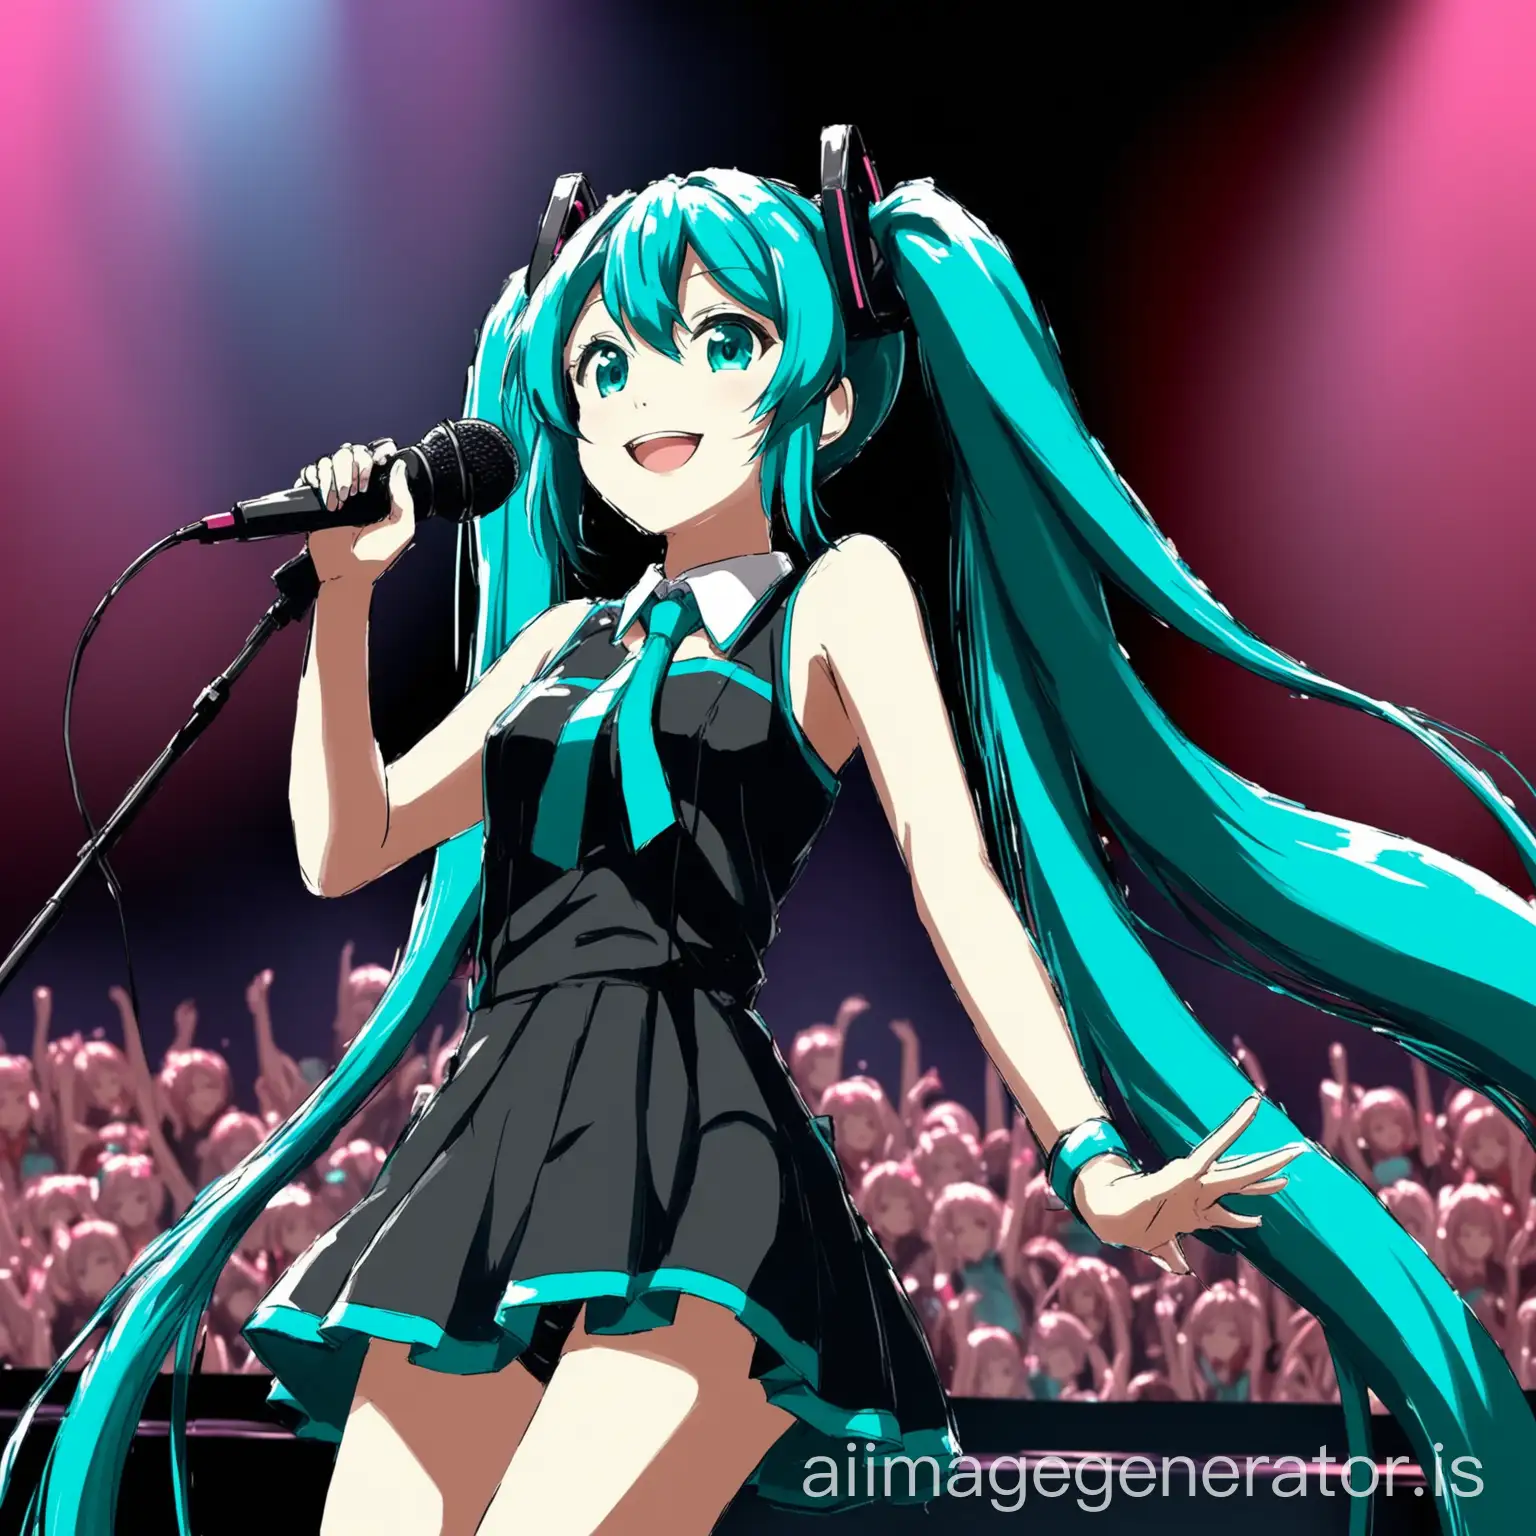 Hatsune Miku performing at a concert, she is holding a microphone and smiling